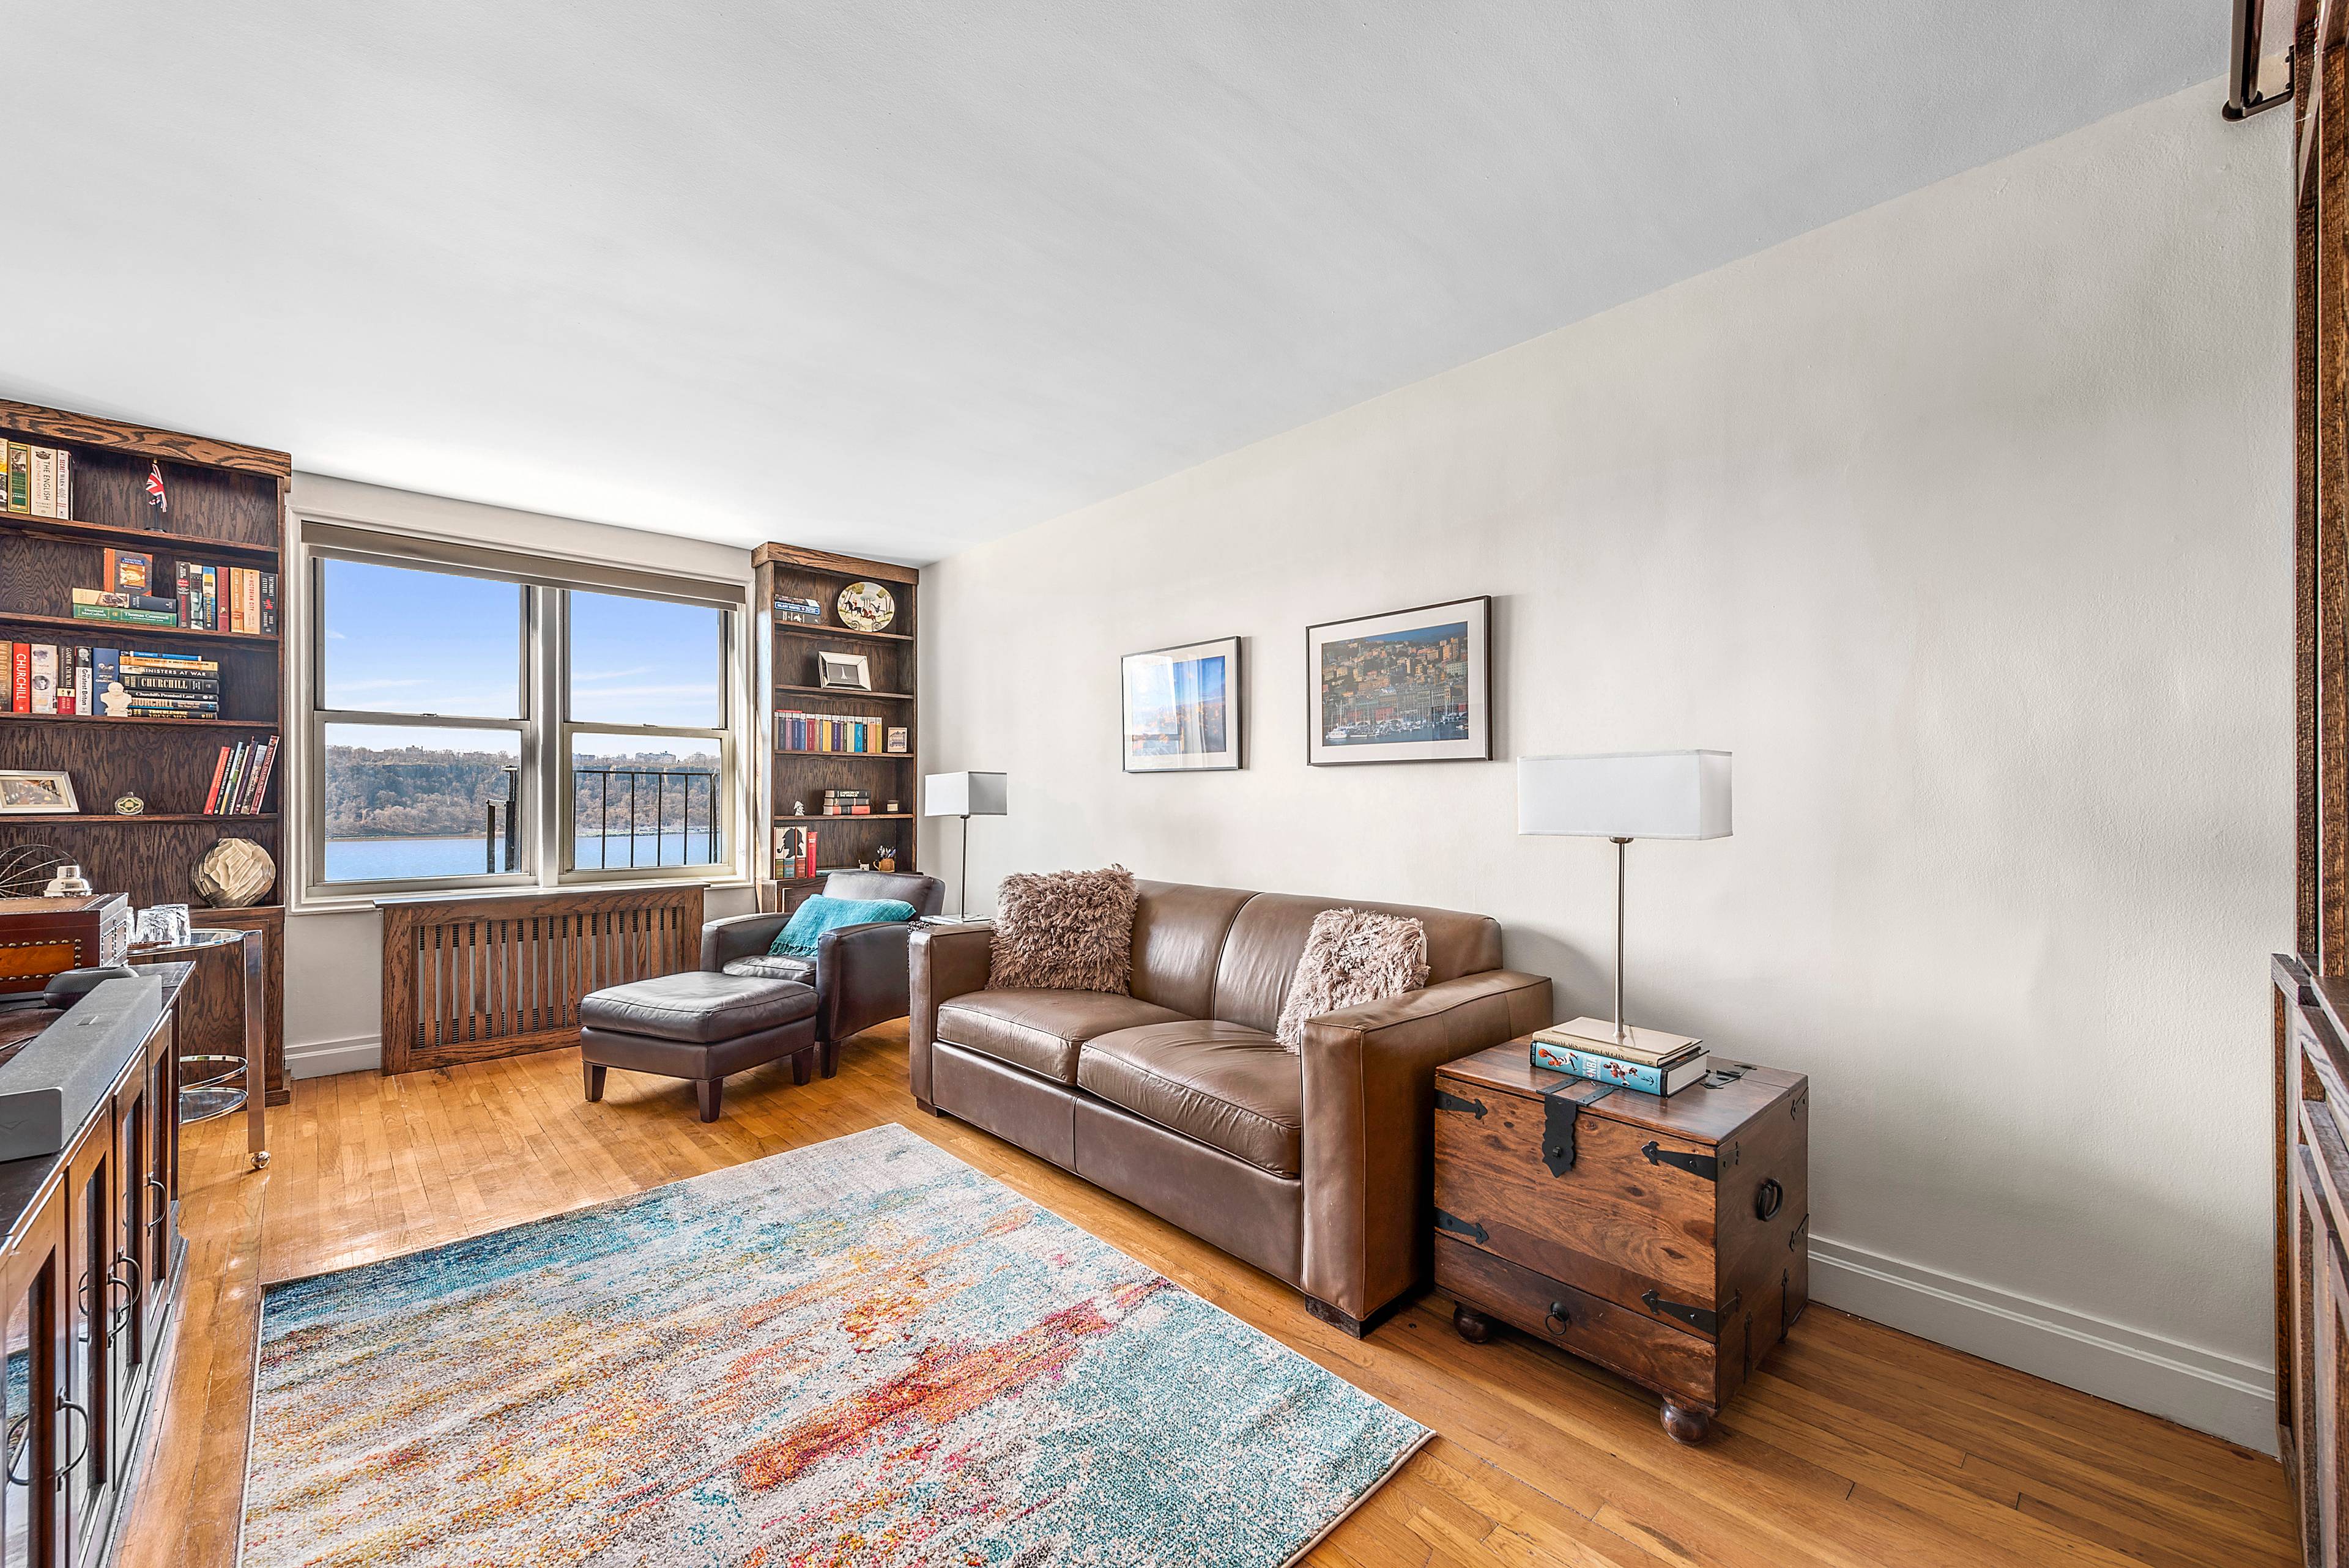 Serene river views and craftsman details define this bright and sunny one bedroom on a cul de sac off West 181st Street.